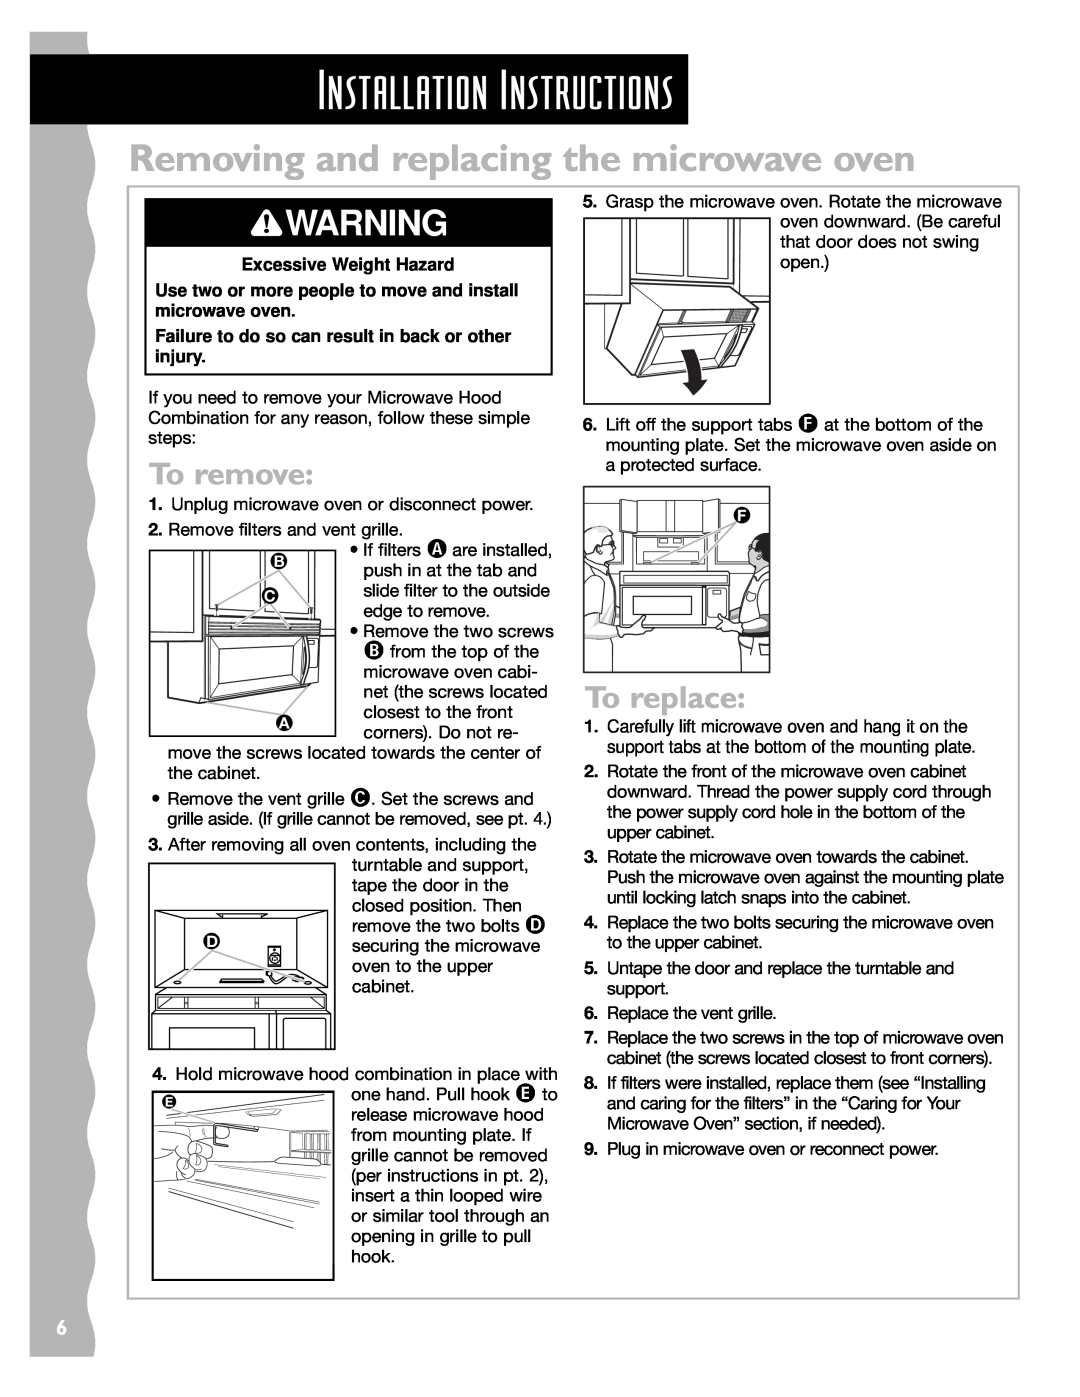 Whirlpool YKHMS147H Installation Instructions, Removing and replacing the microwave oven, To remove, To replace 